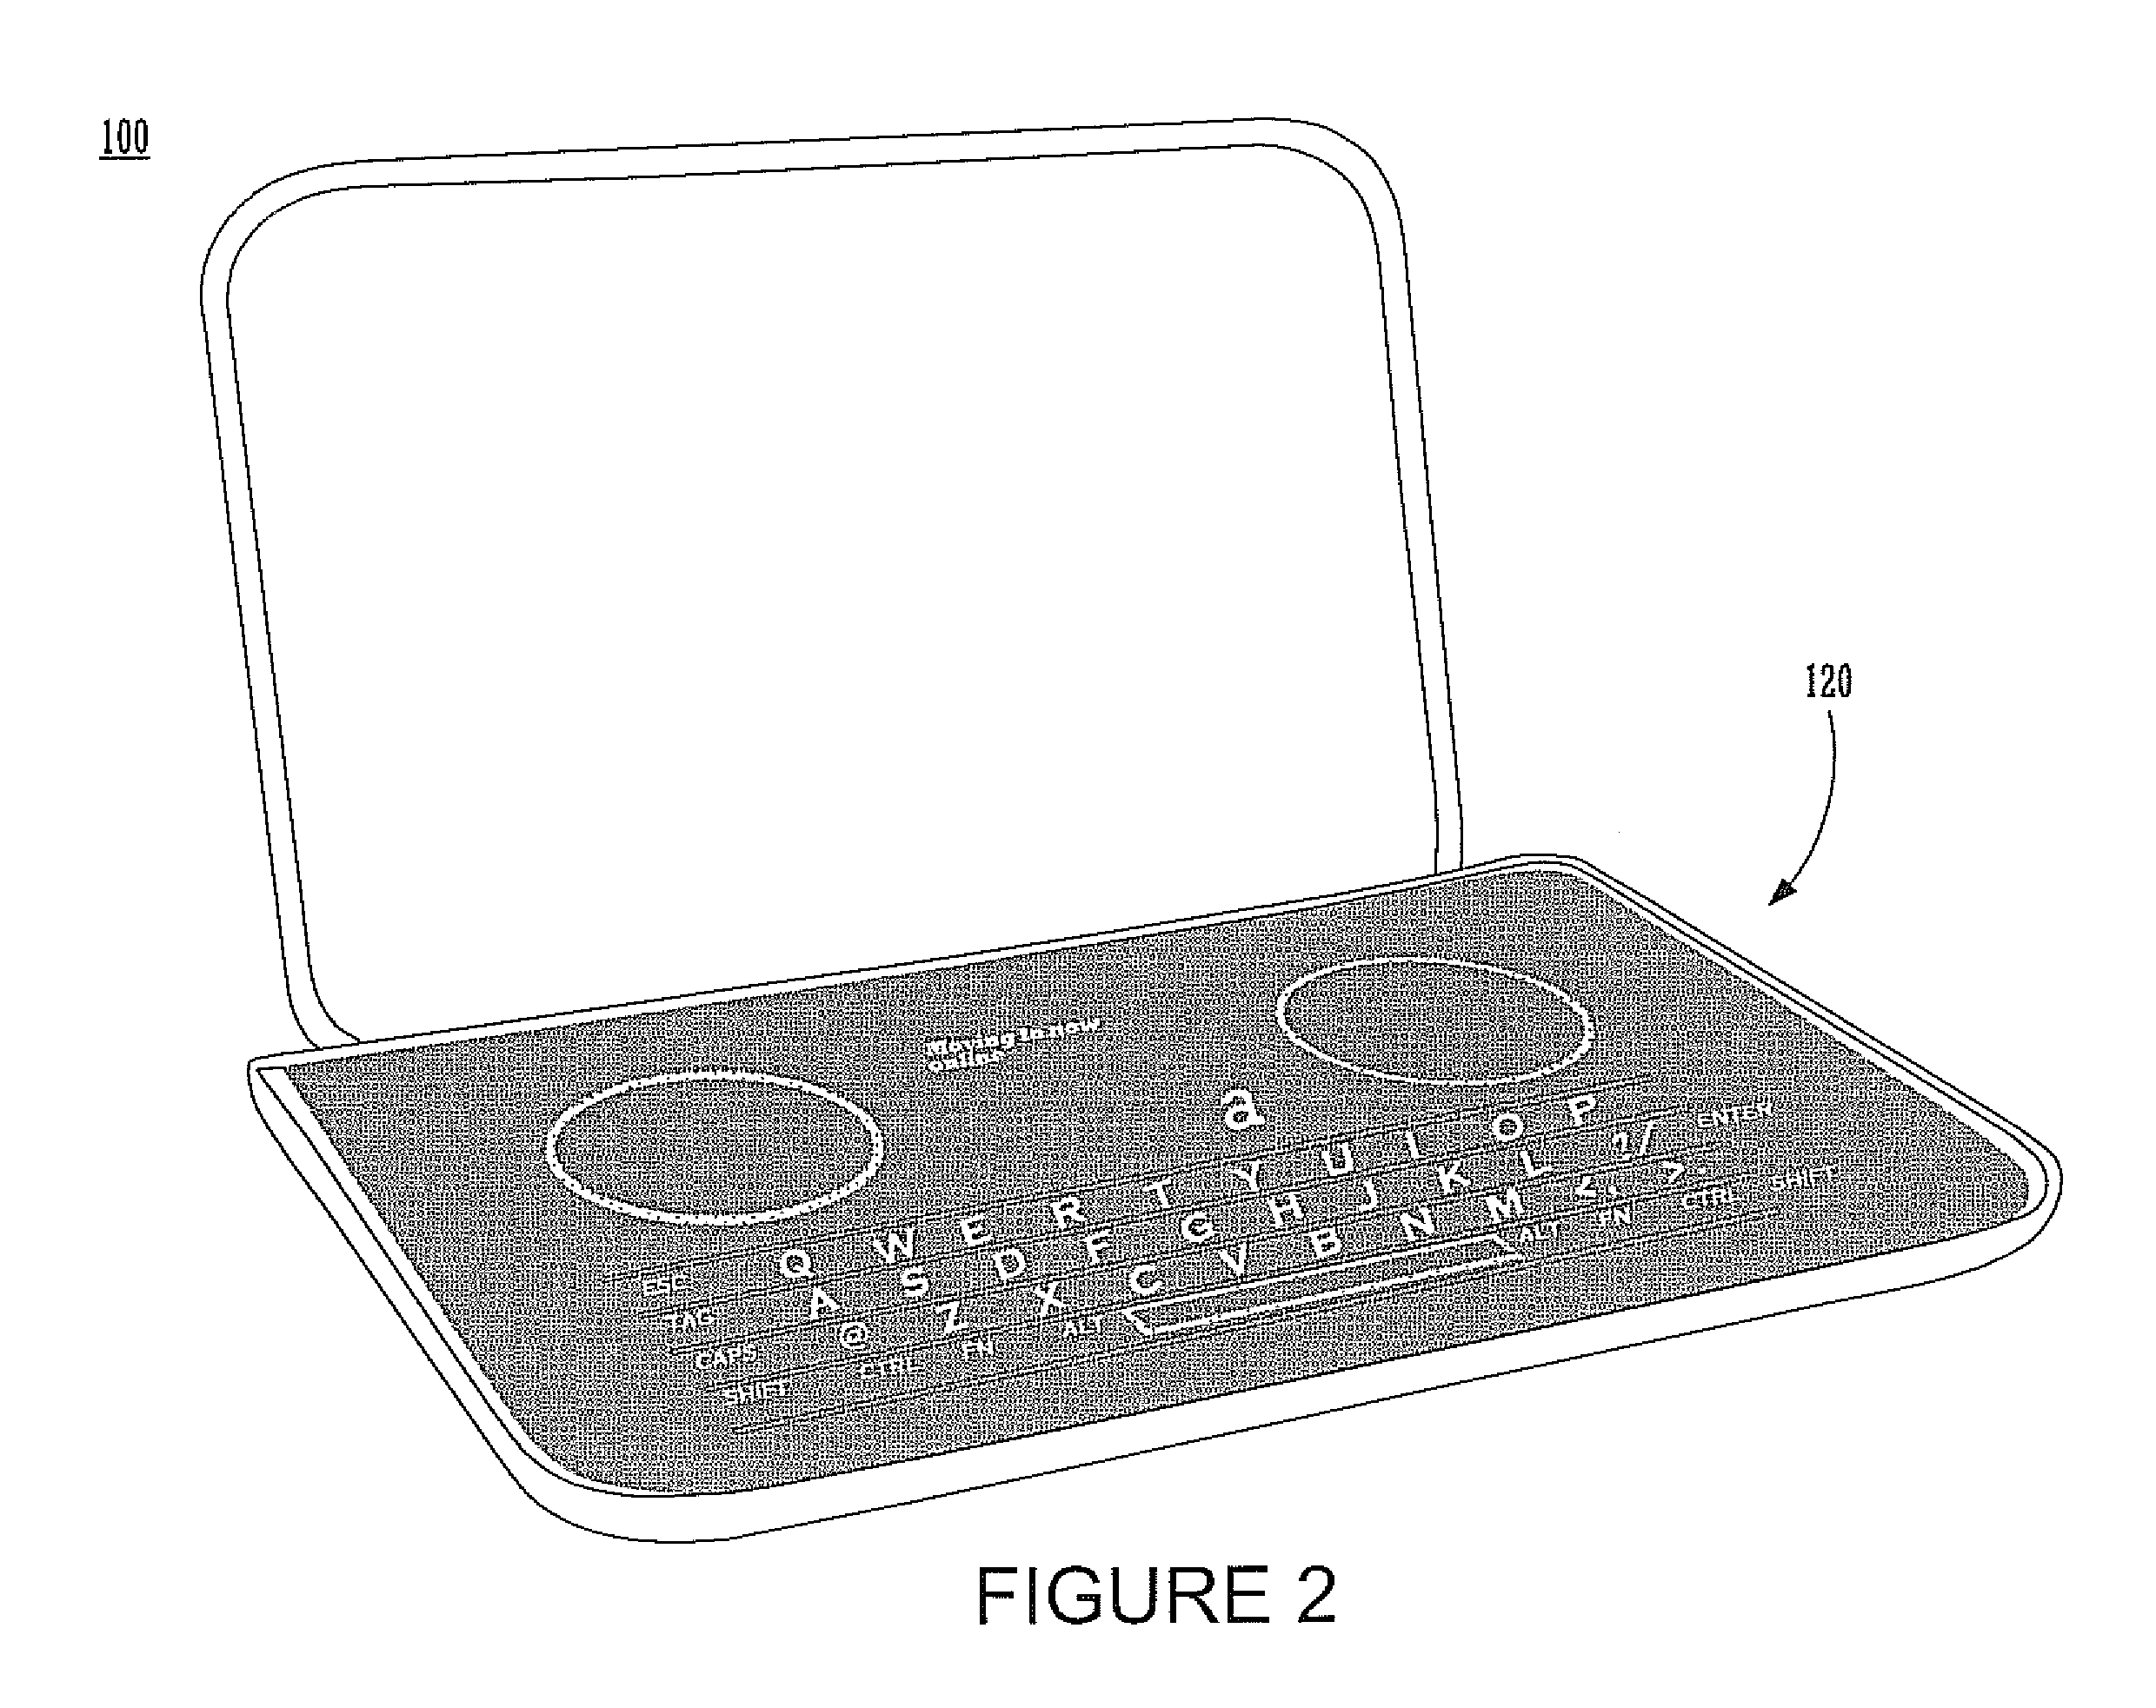 Versatile keyboard input and output device